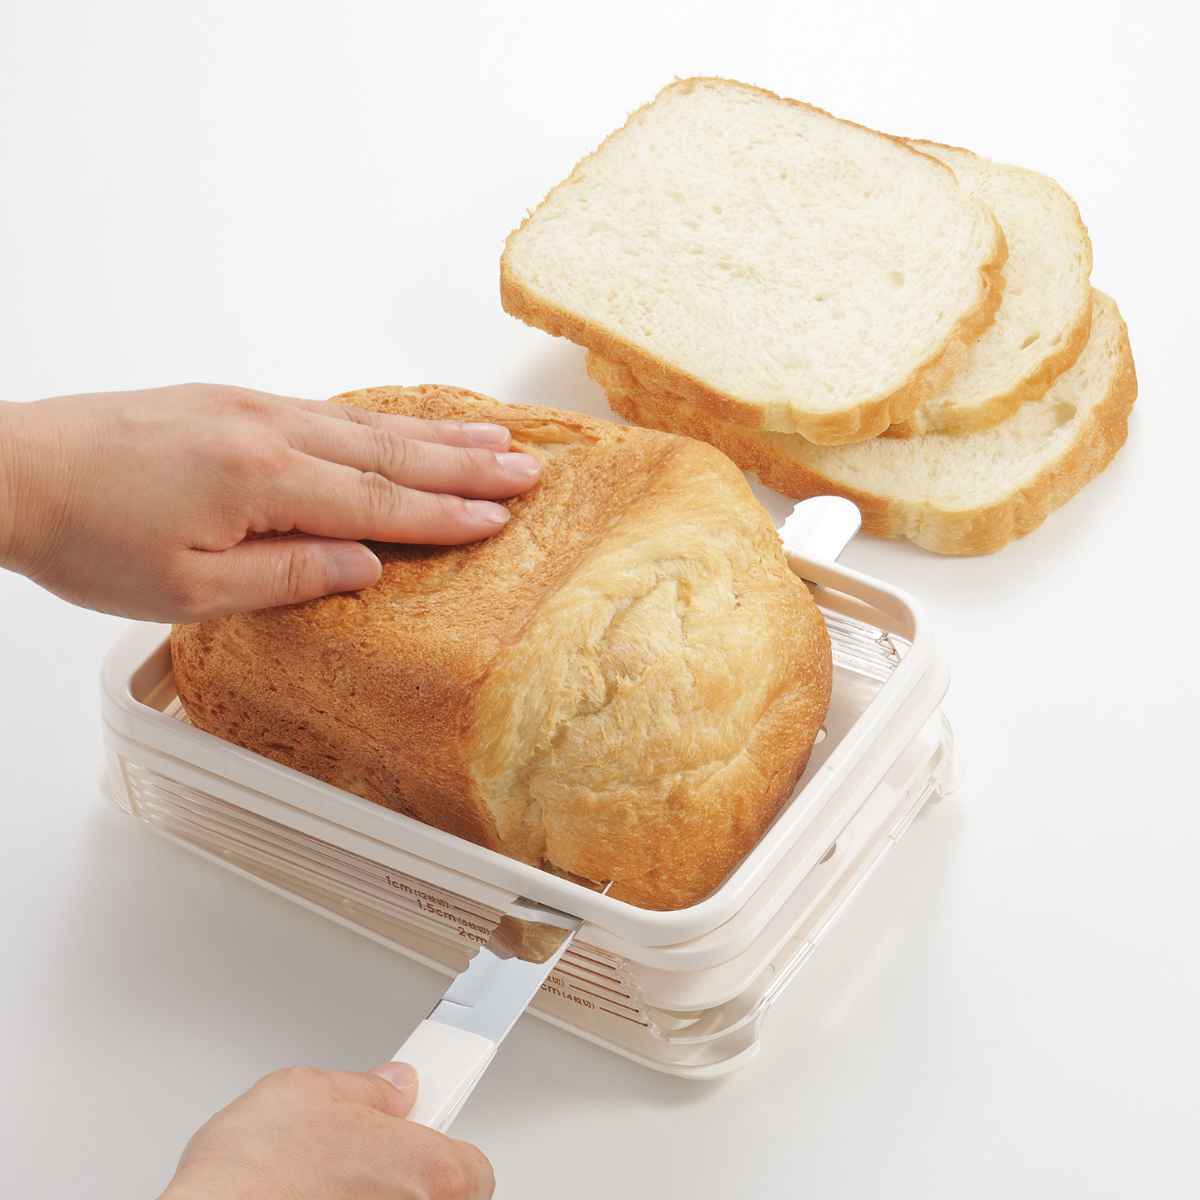  bread case cover attaching home bakery slicer with a hood ( bread case bread cutting guide bread slicer plain bread slicer slice bread cutting made in Japan )